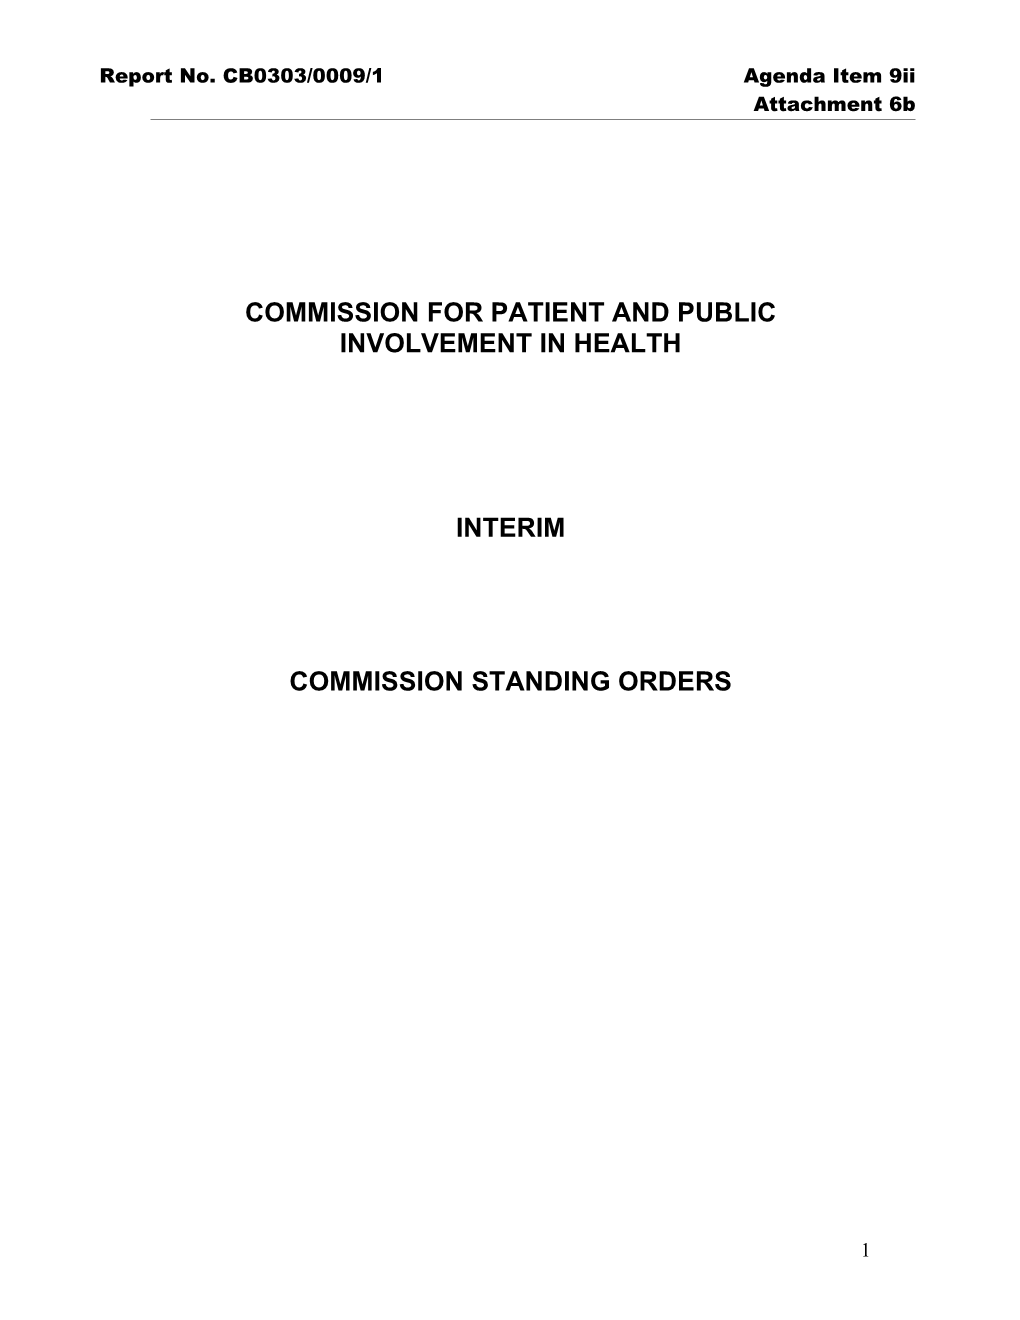 Commission for Patient and Public Involvement in Health